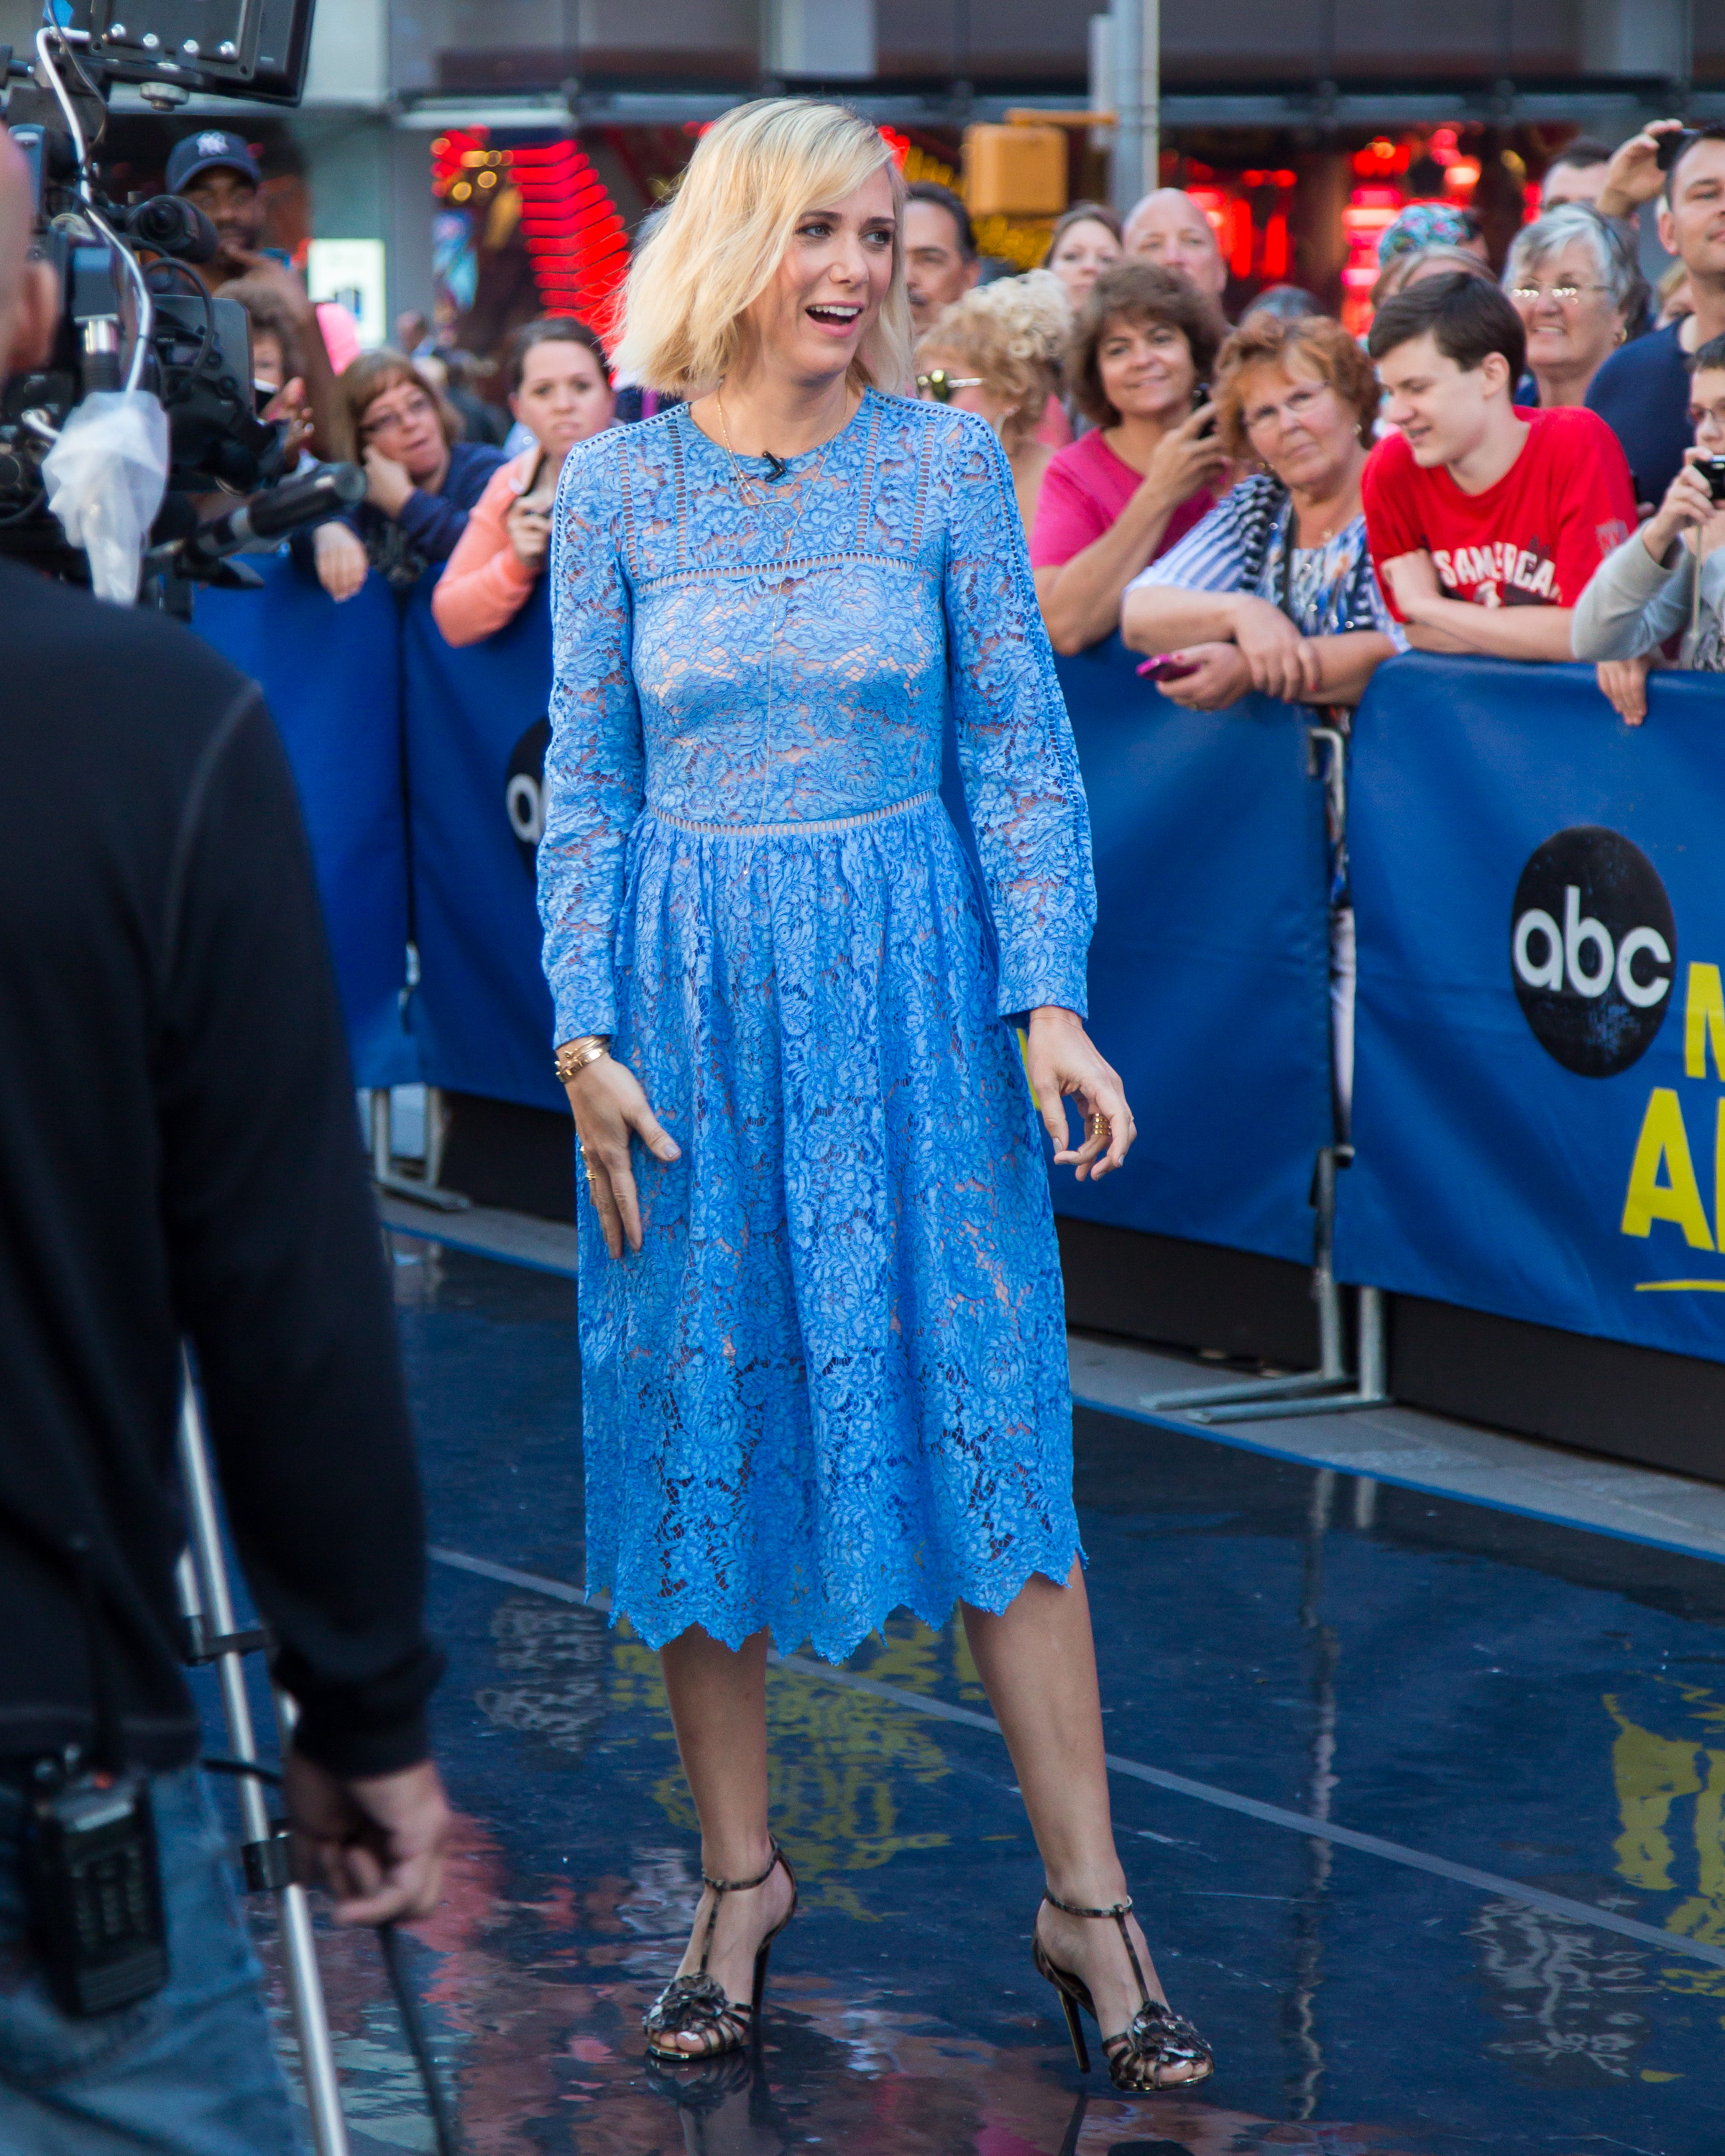 Kristen Wiig making an appearance at 'Good Morning America' in New York